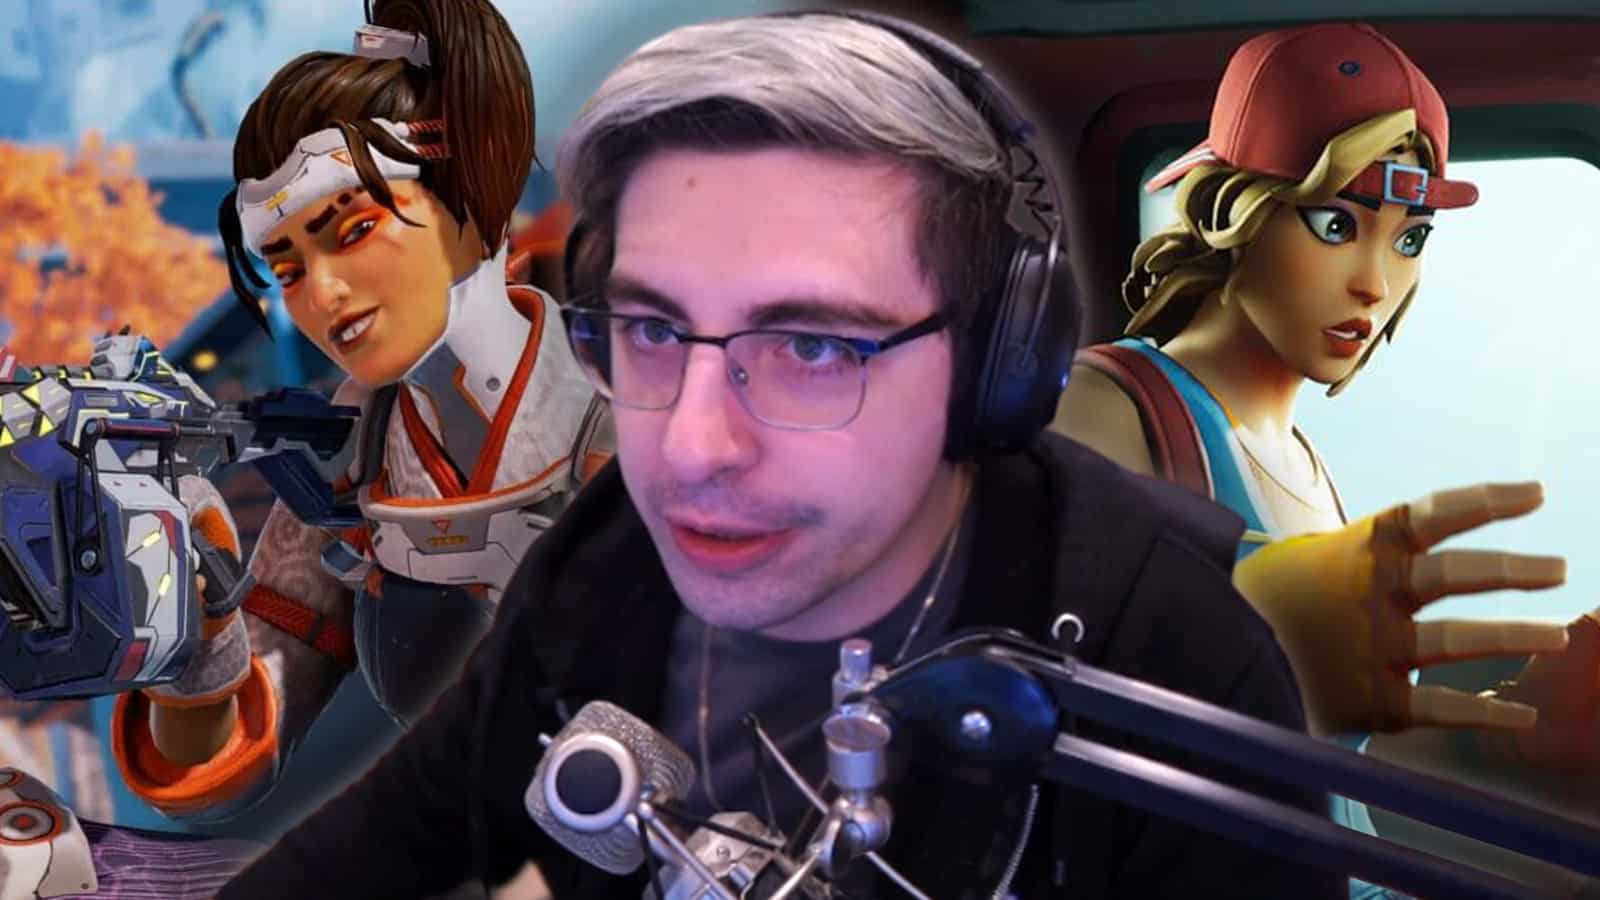 Shroud sitting on his Twitch stream between Rampart from Apex Legends and battle royale girl from Fortnite.